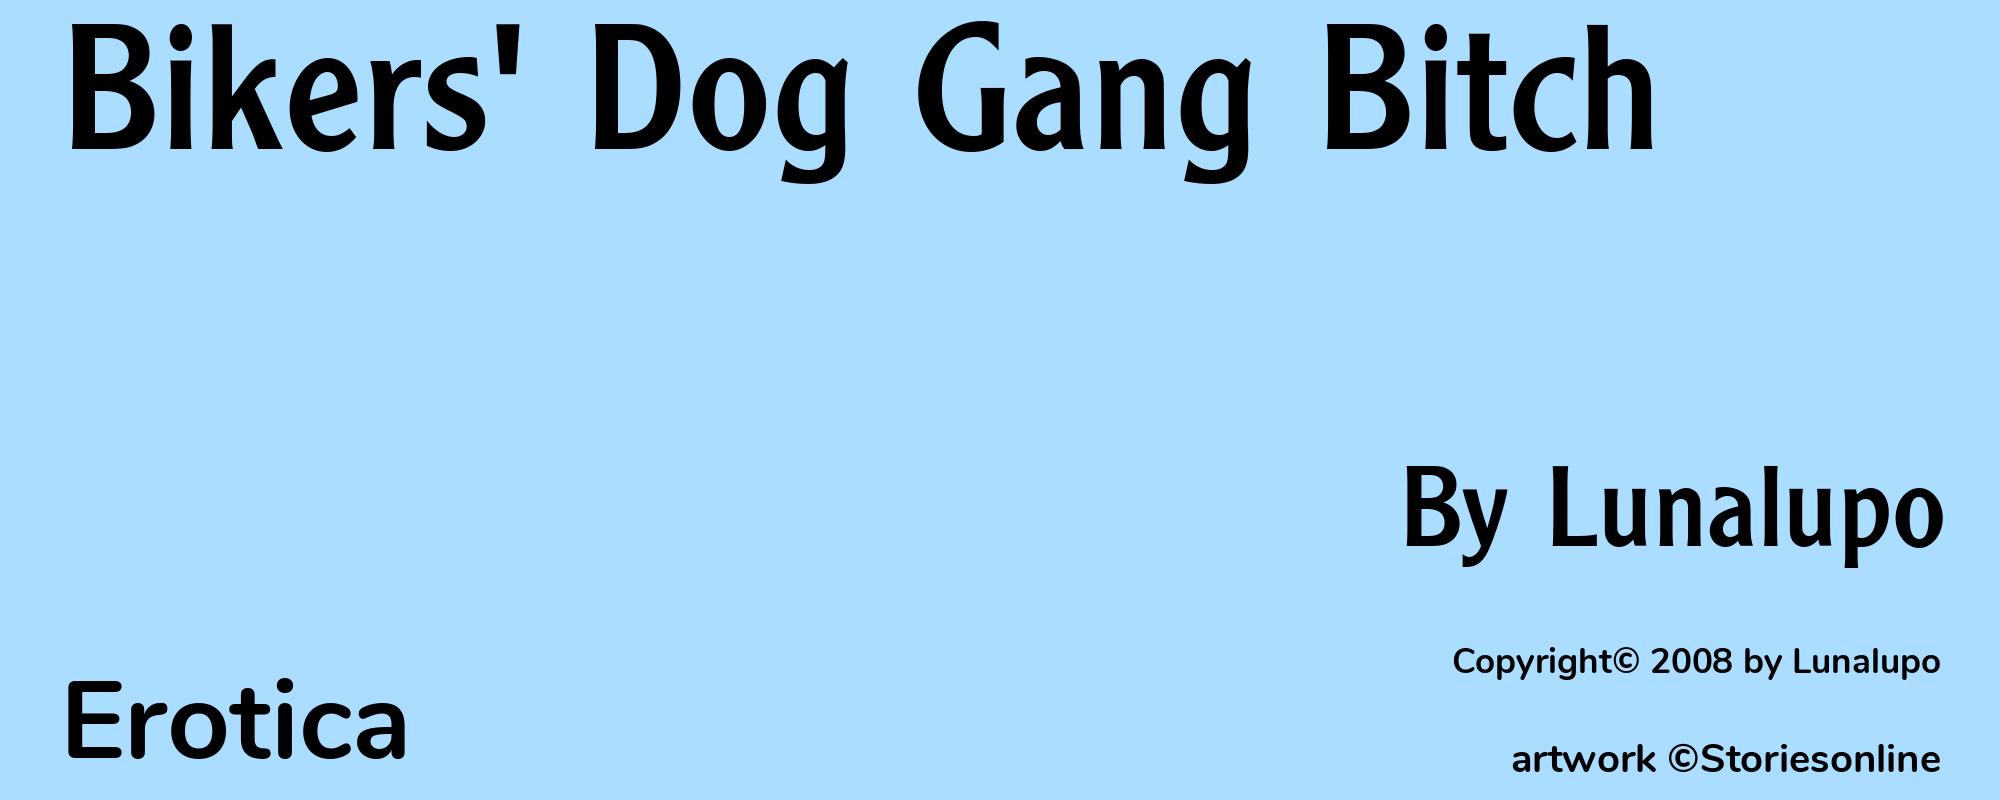 Bikers' Dog Gang Bitch - Cover